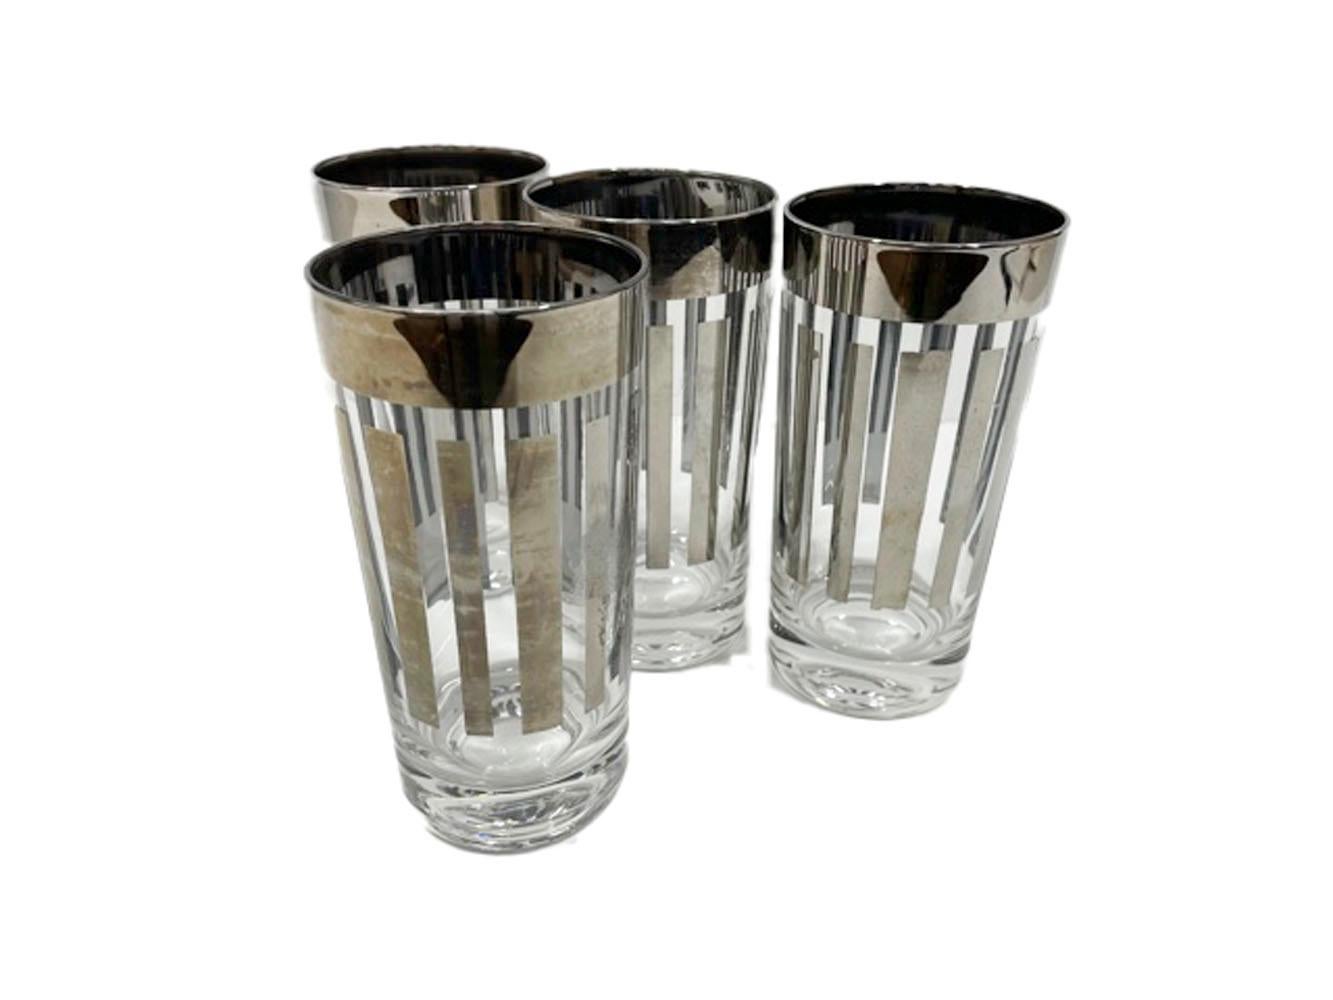 American Vintage Silver Decorated Highball Glasses with Vertical Bars below a Wide Band For Sale